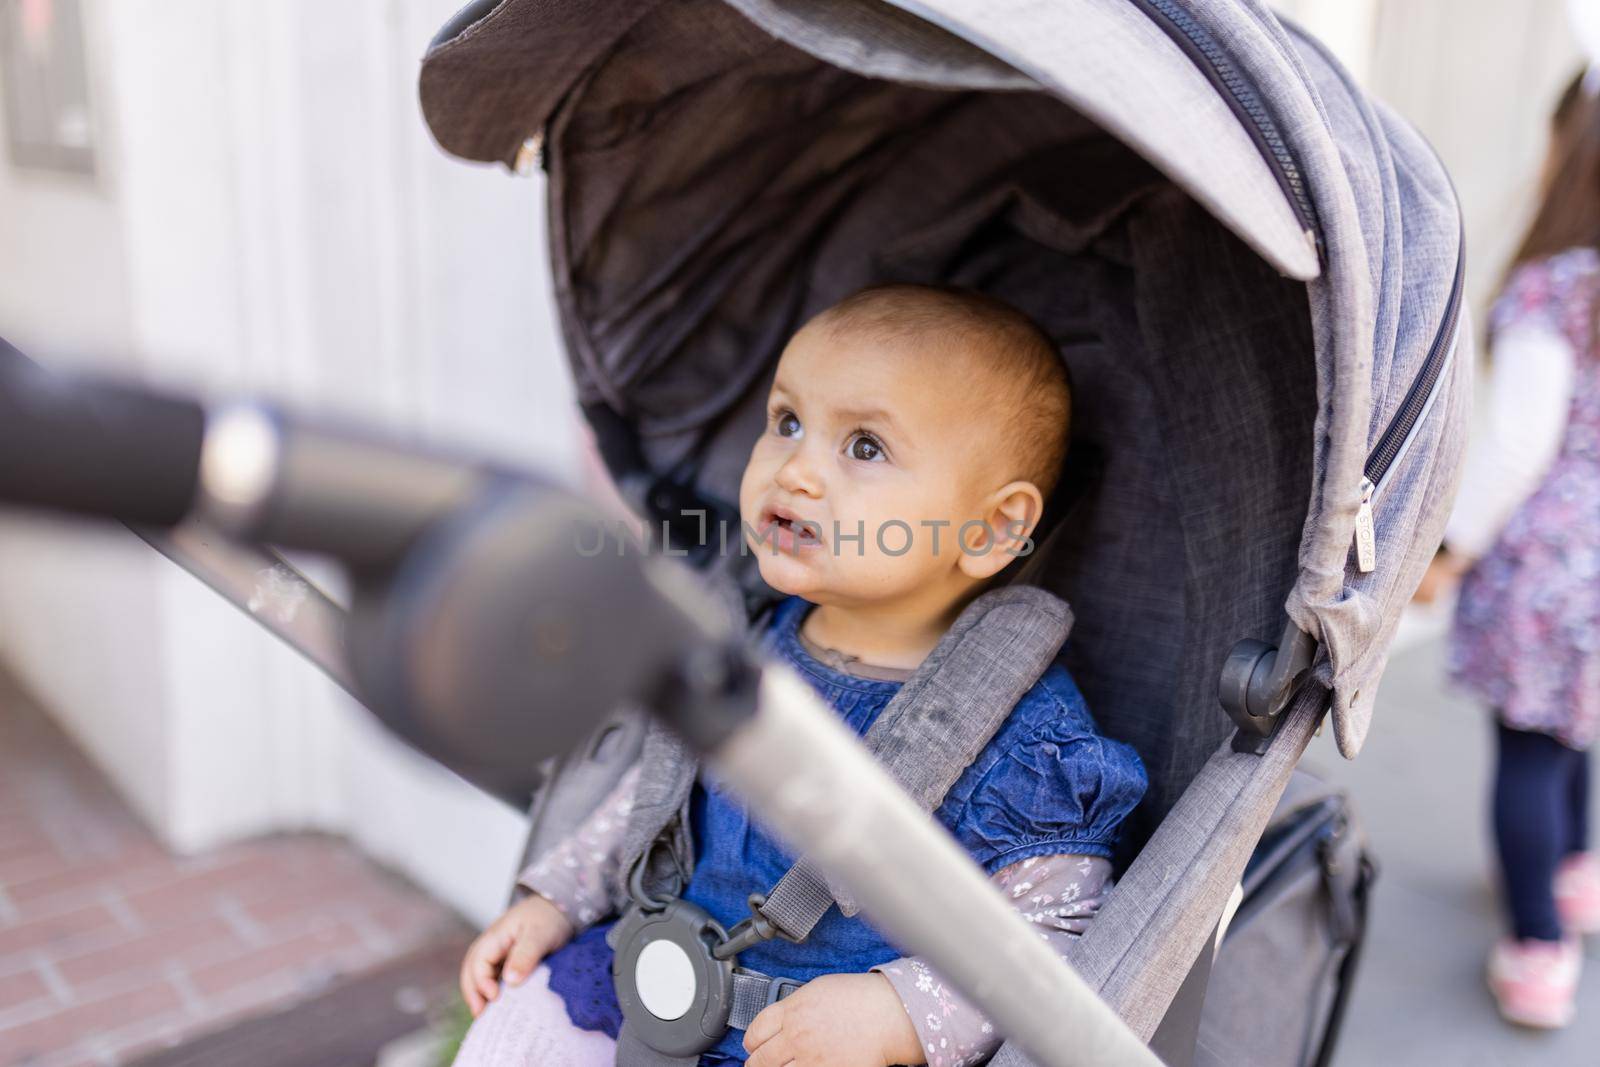 Adorable concerned-looking baby looking up in gray stroller on the sidewalk. Portrait of cute infant in blue dress resting in stroller in the street. Peaceful toddlers outing